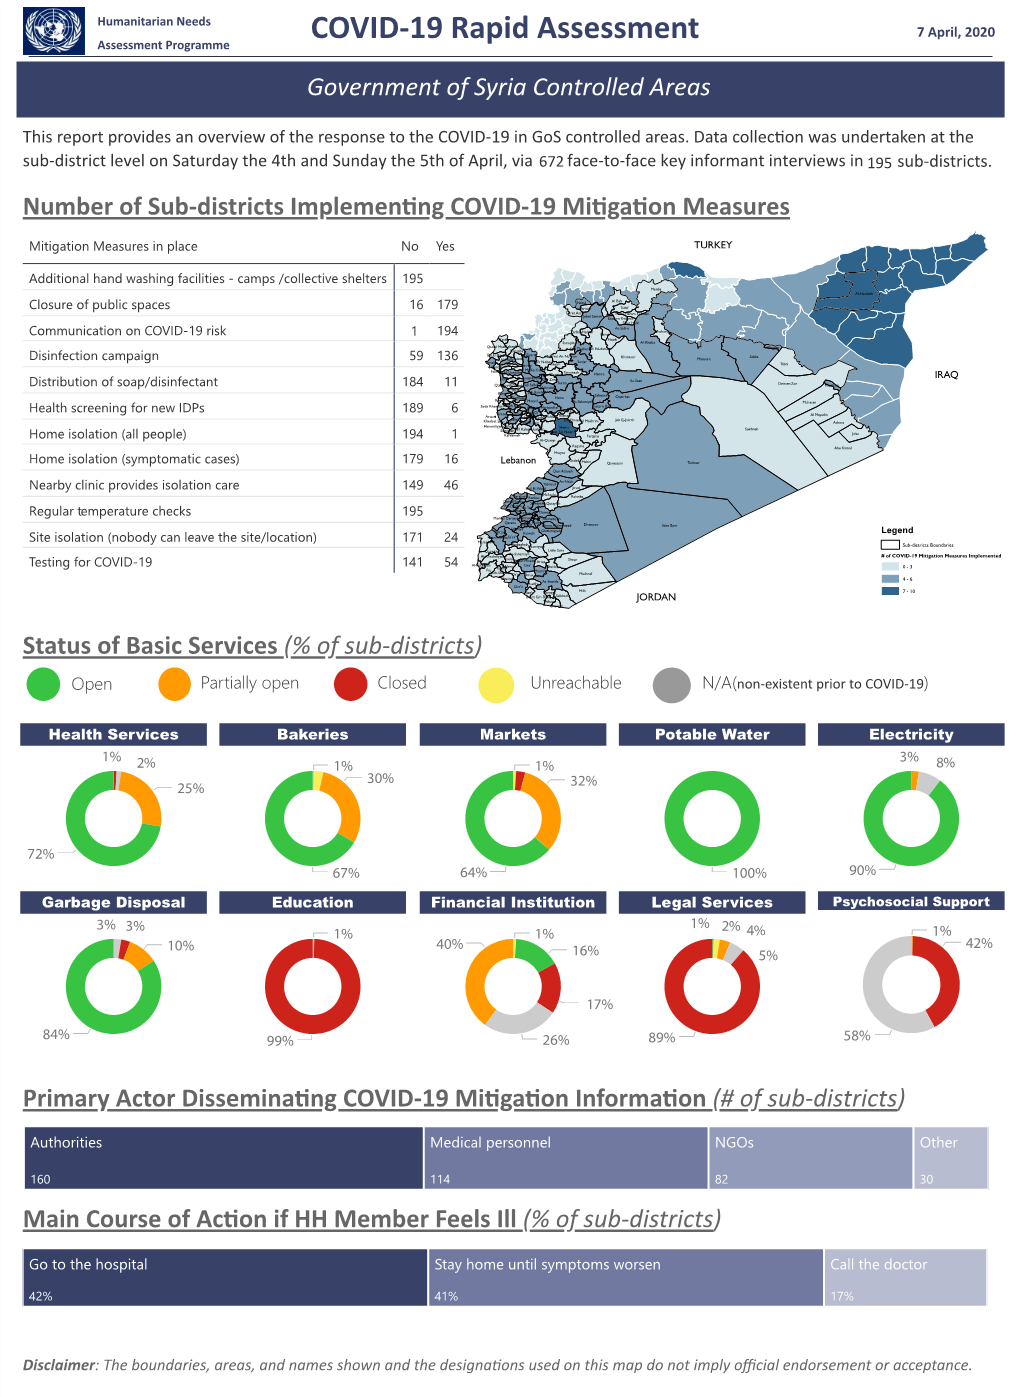 COVID-19 Rapid Assessment Government of Syria Controlled Areas